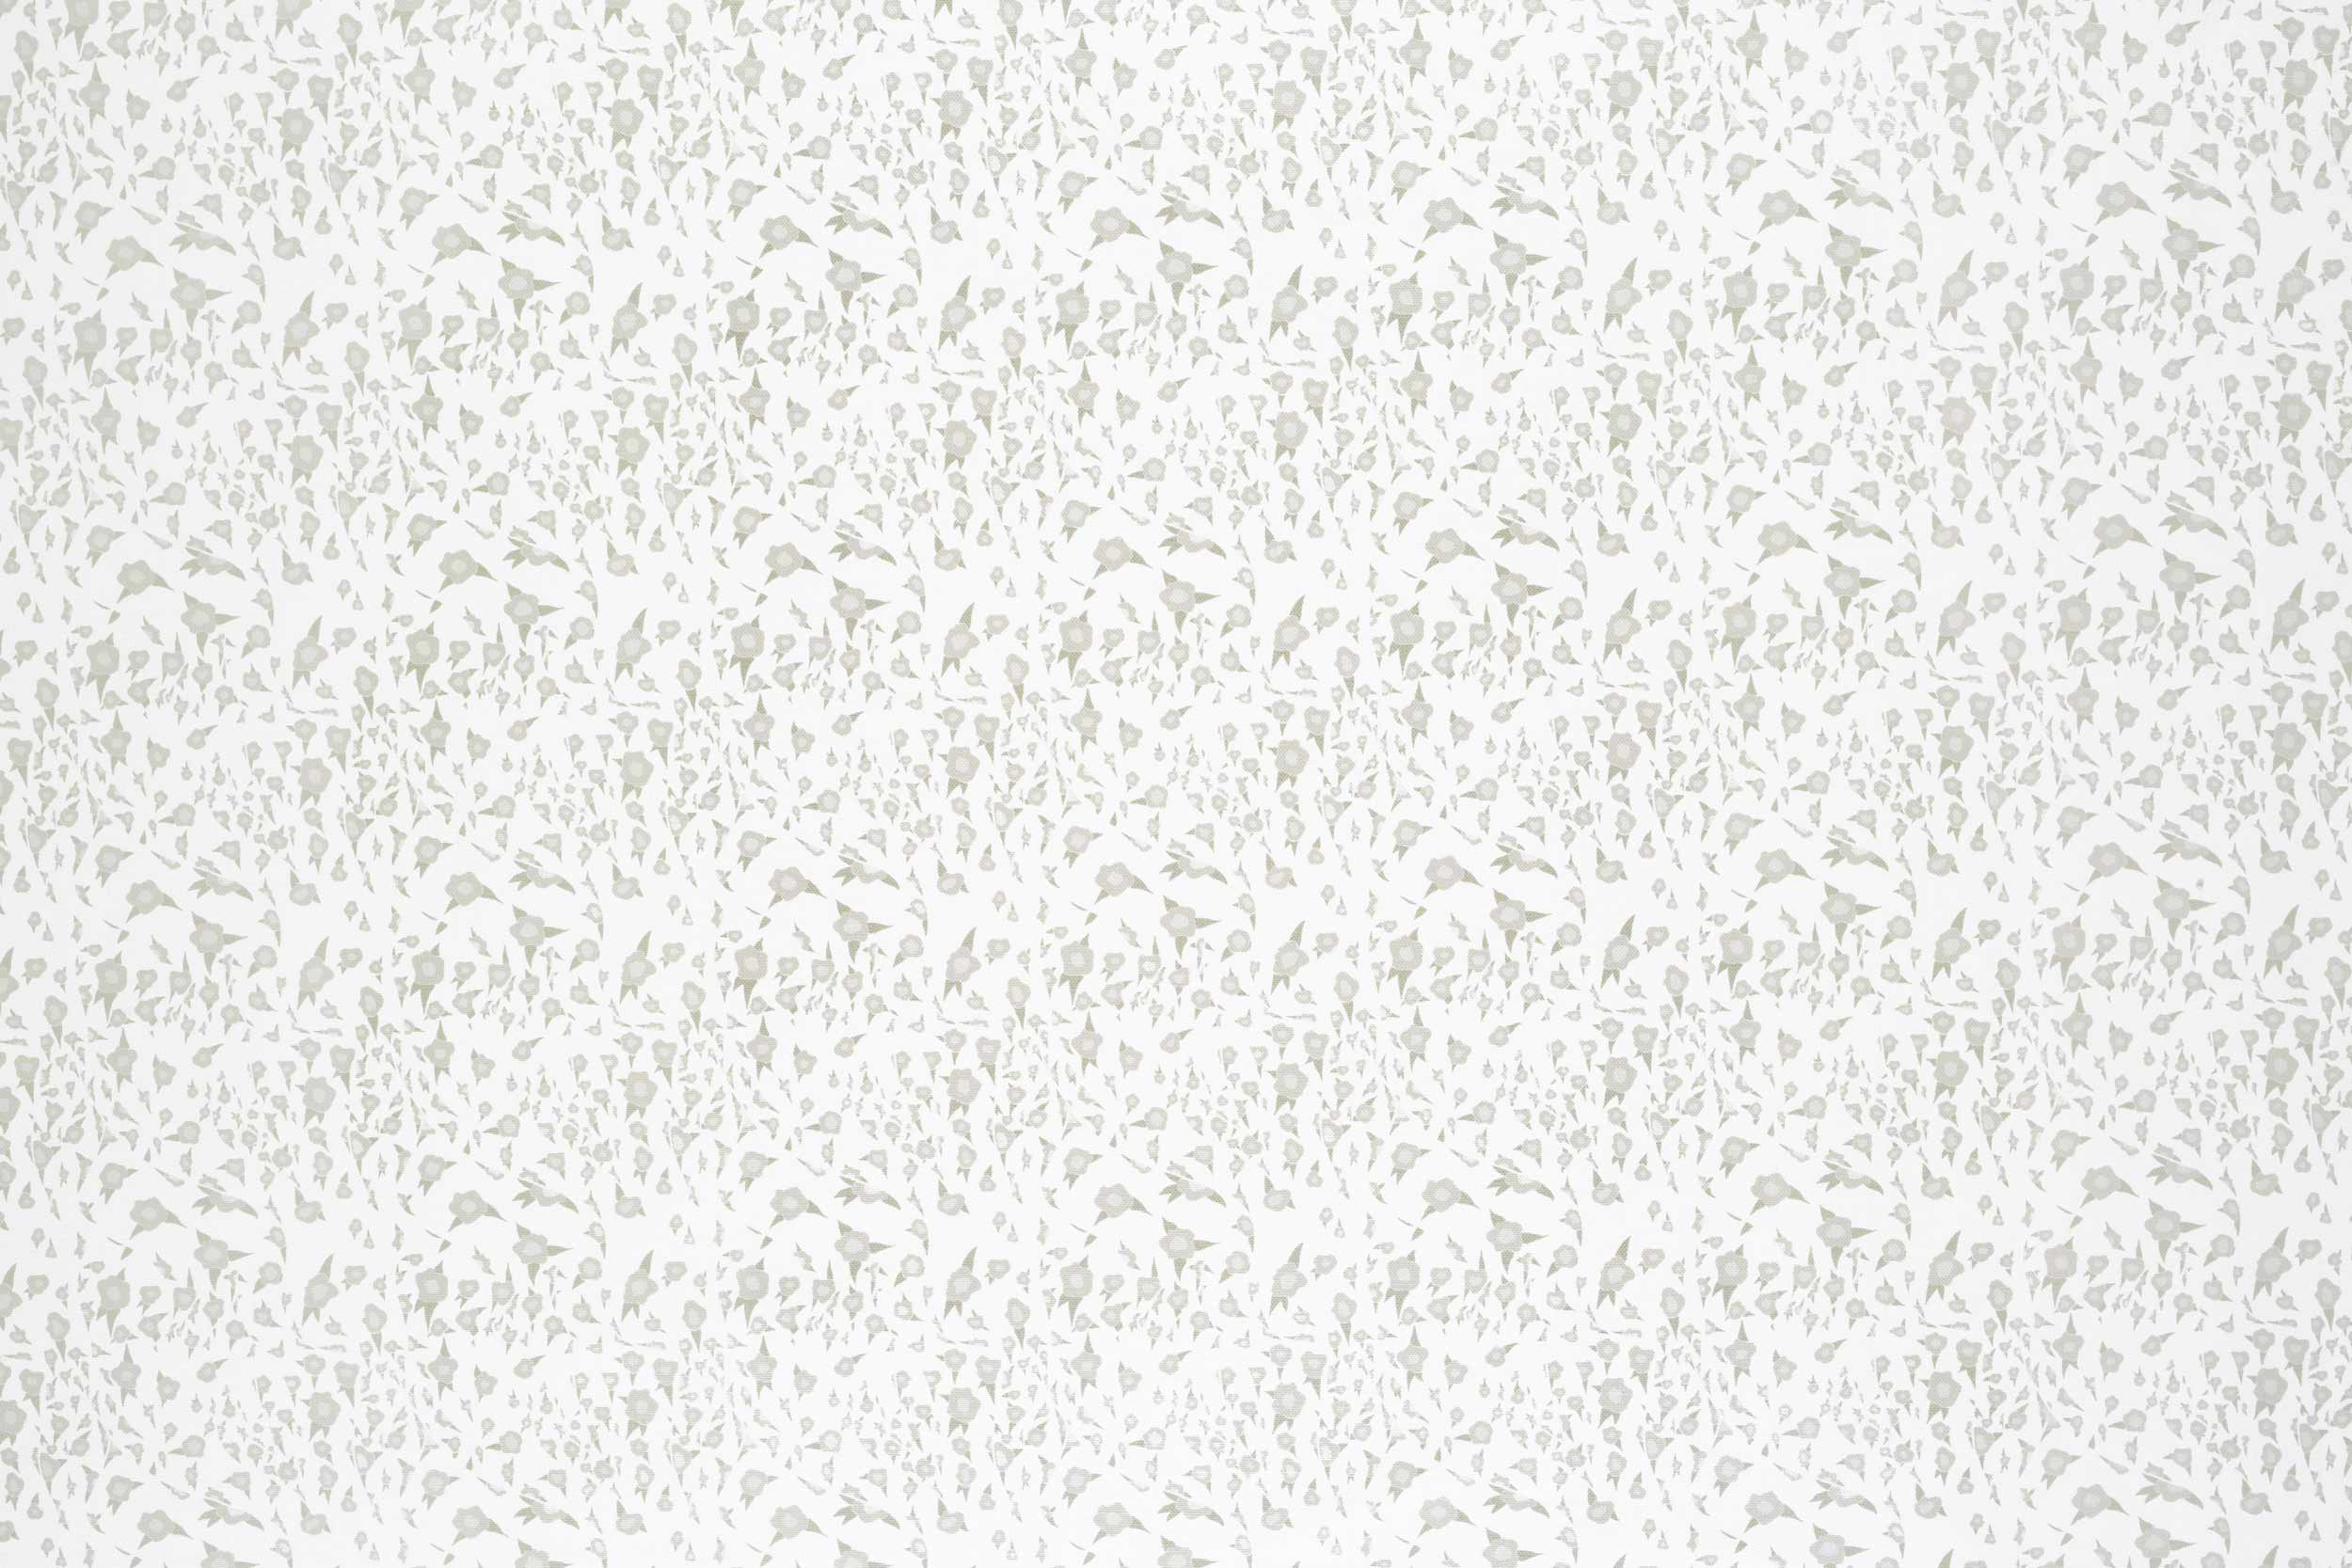 Detail of fabric in a small-scale floral pattern in shades of gray on a cream field.